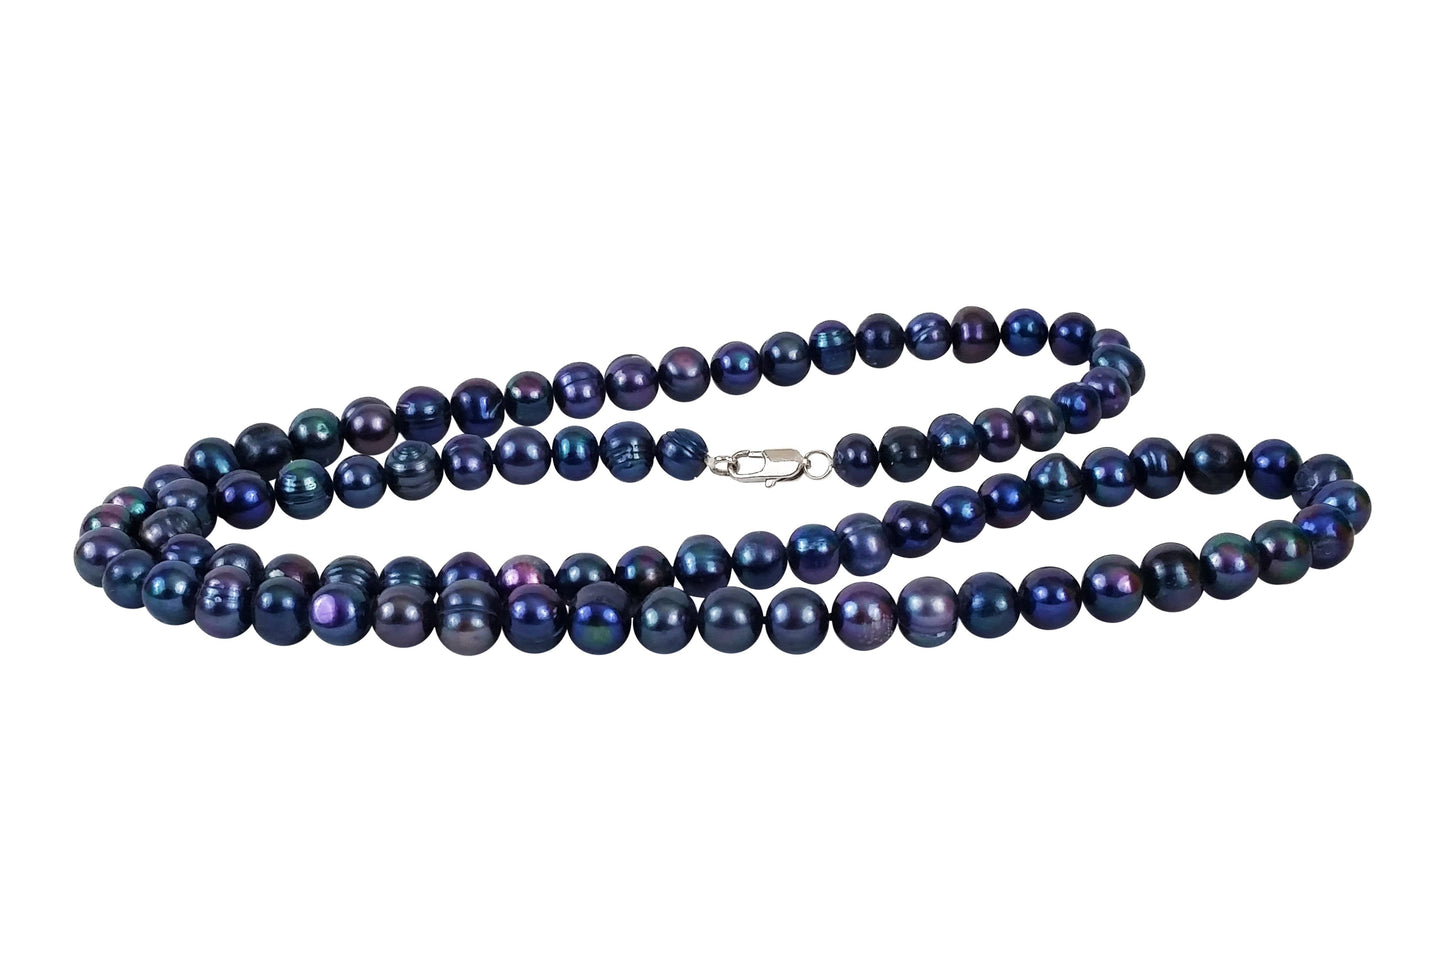 Fare - Black Freshwater Pearl Necklace